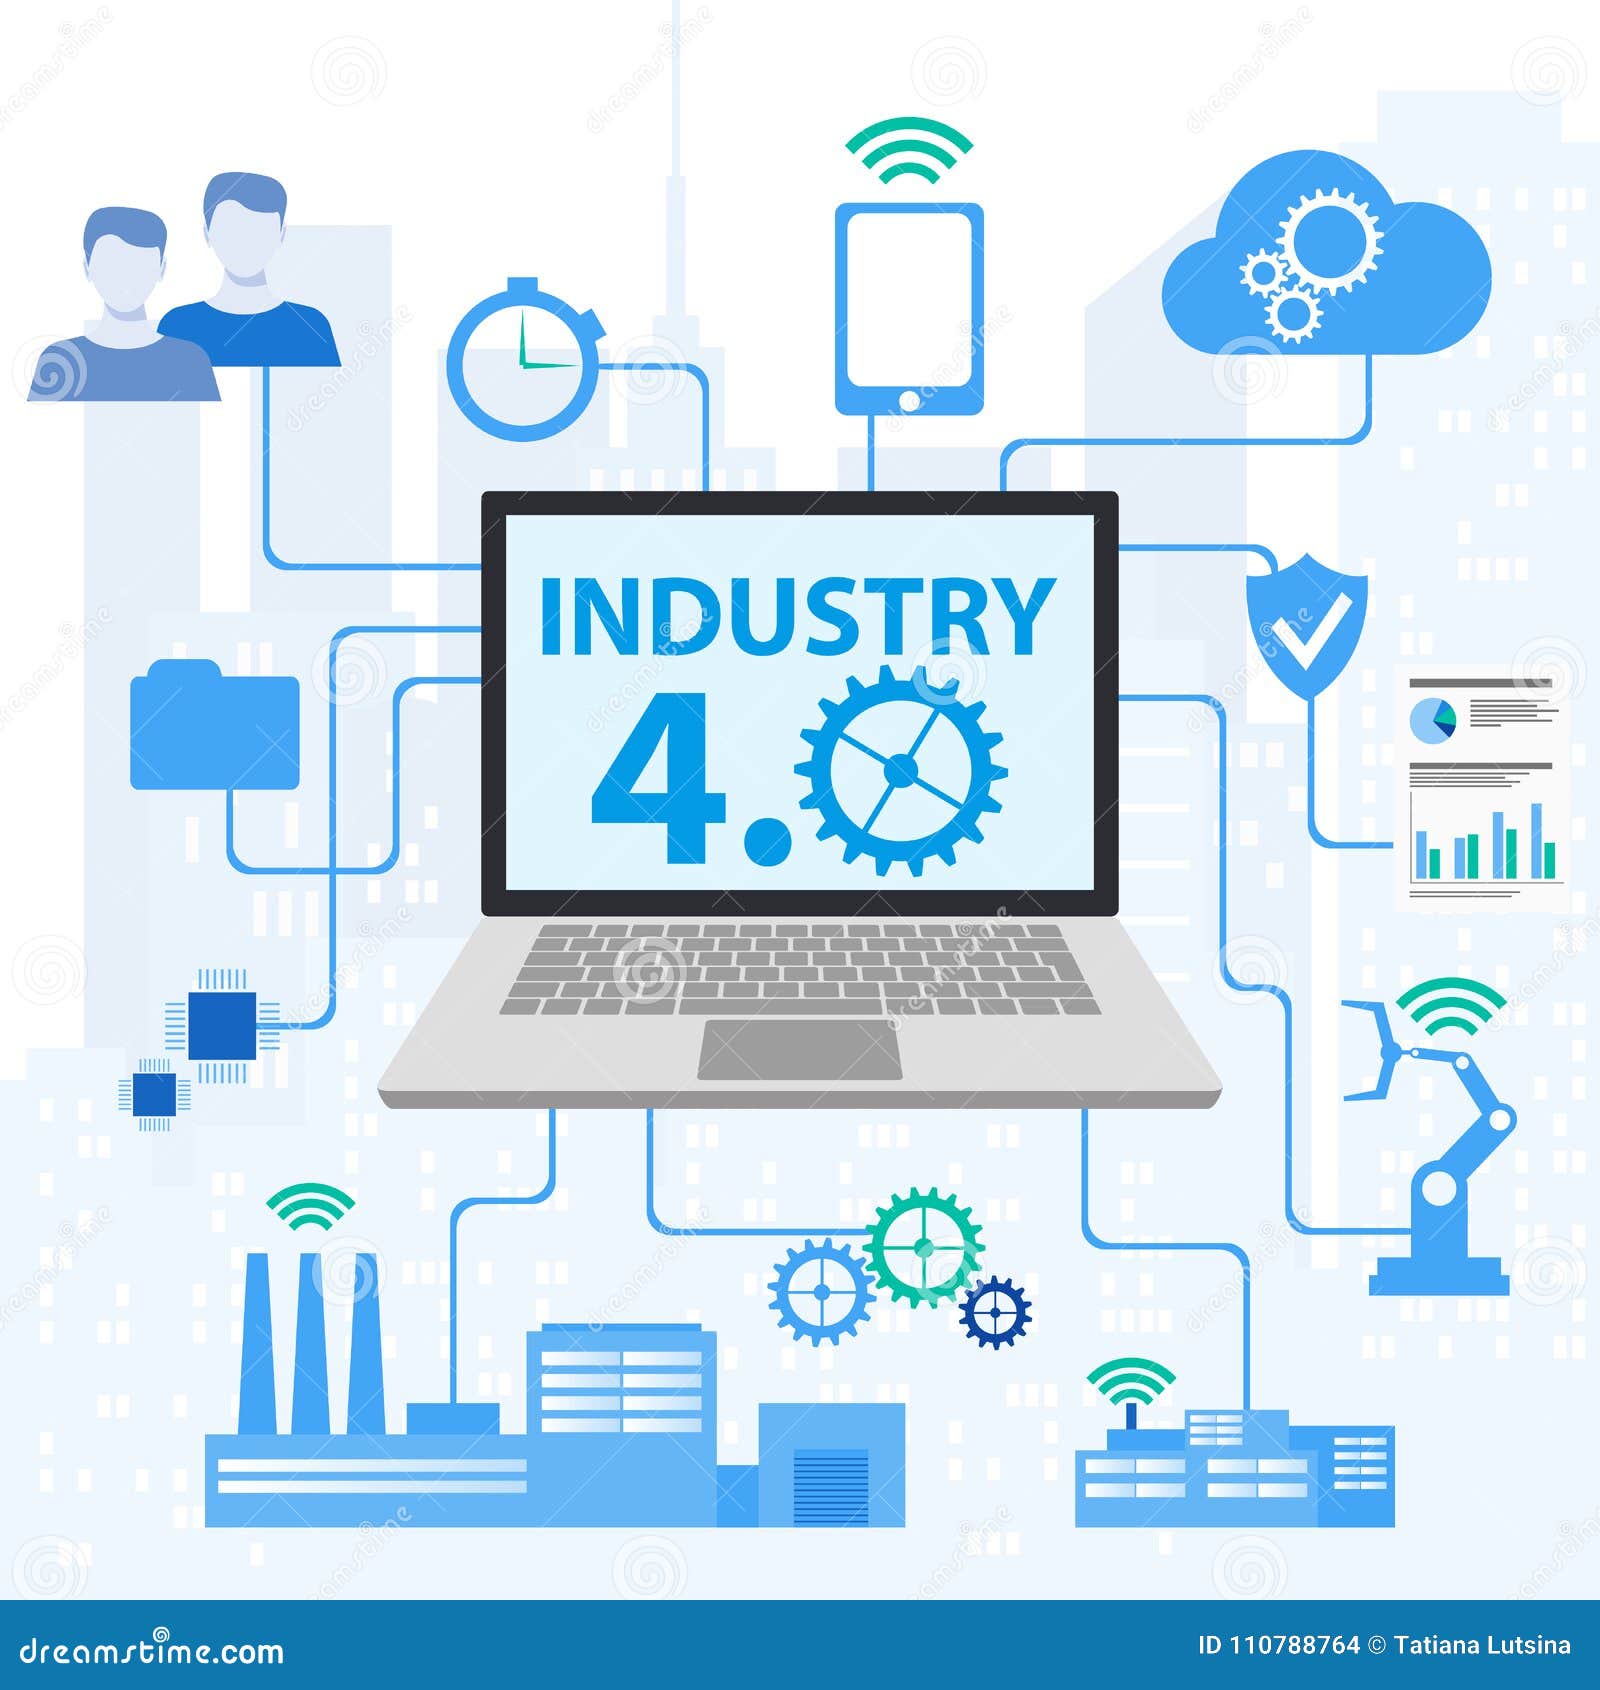 physical systems, cloud computing, cognitive computing industry 4.0 infographic.